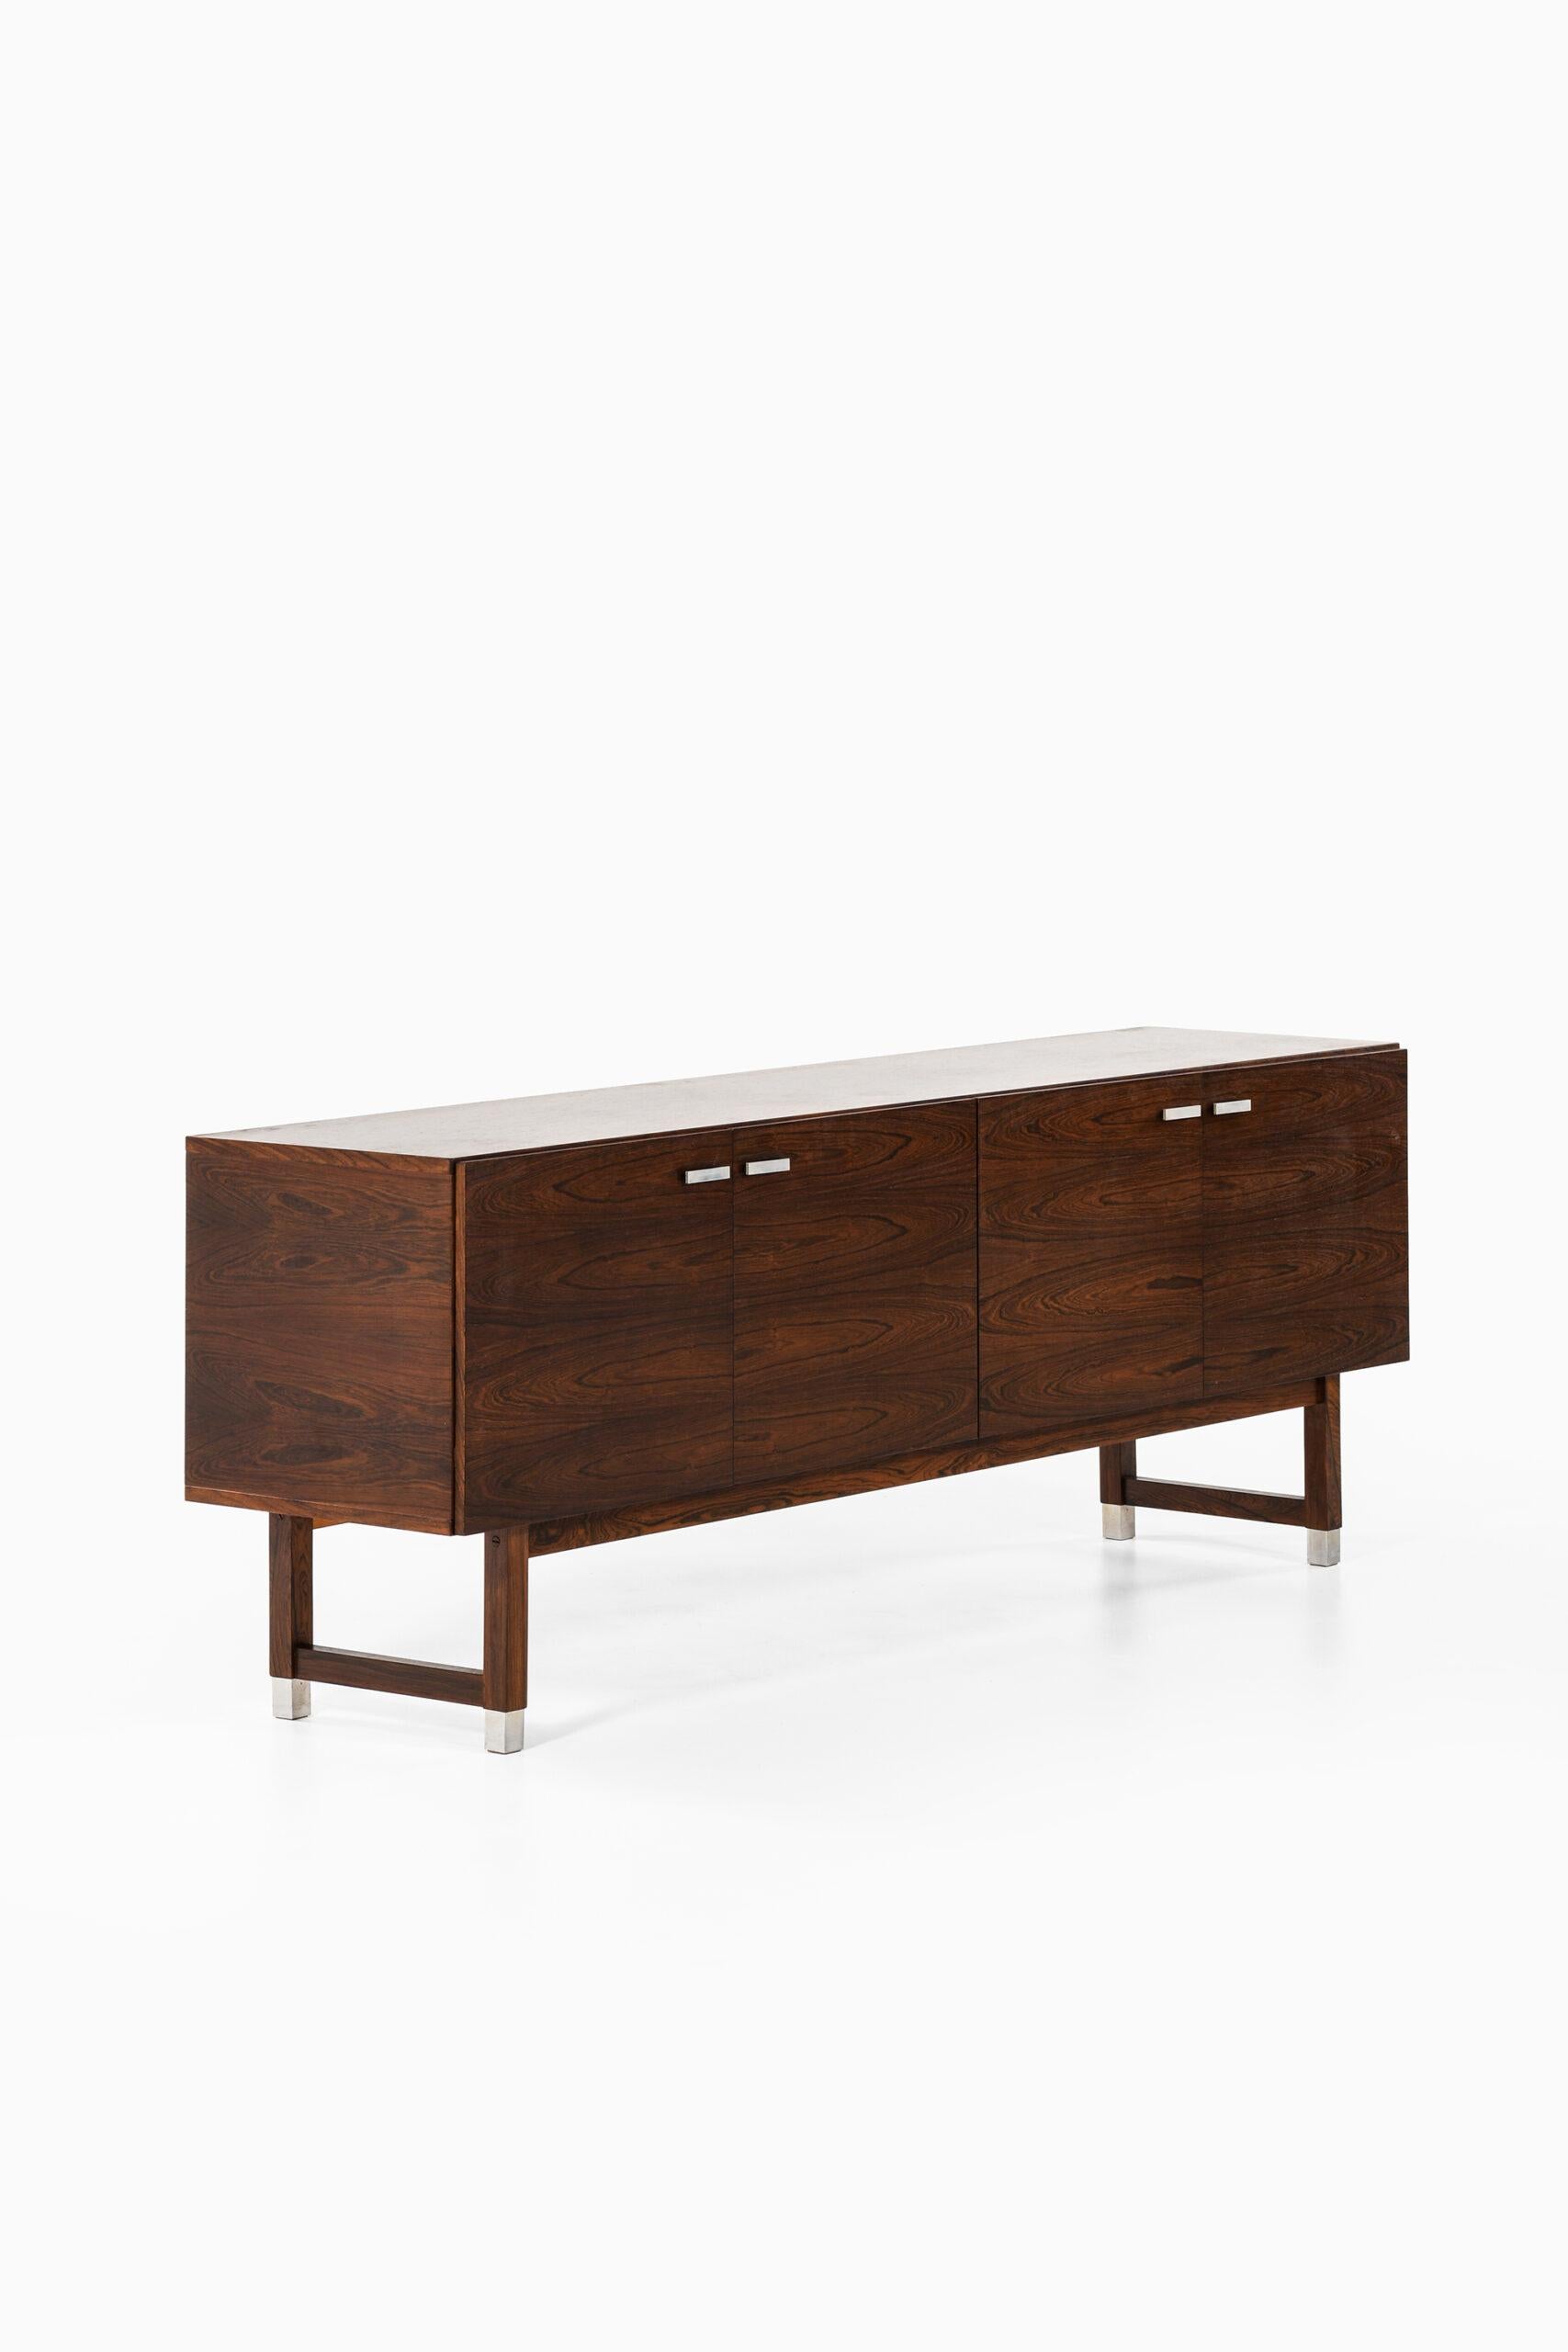 Kai Kristiansen Sideboard Produced by PSA Furniture in Denmark For Sale 1